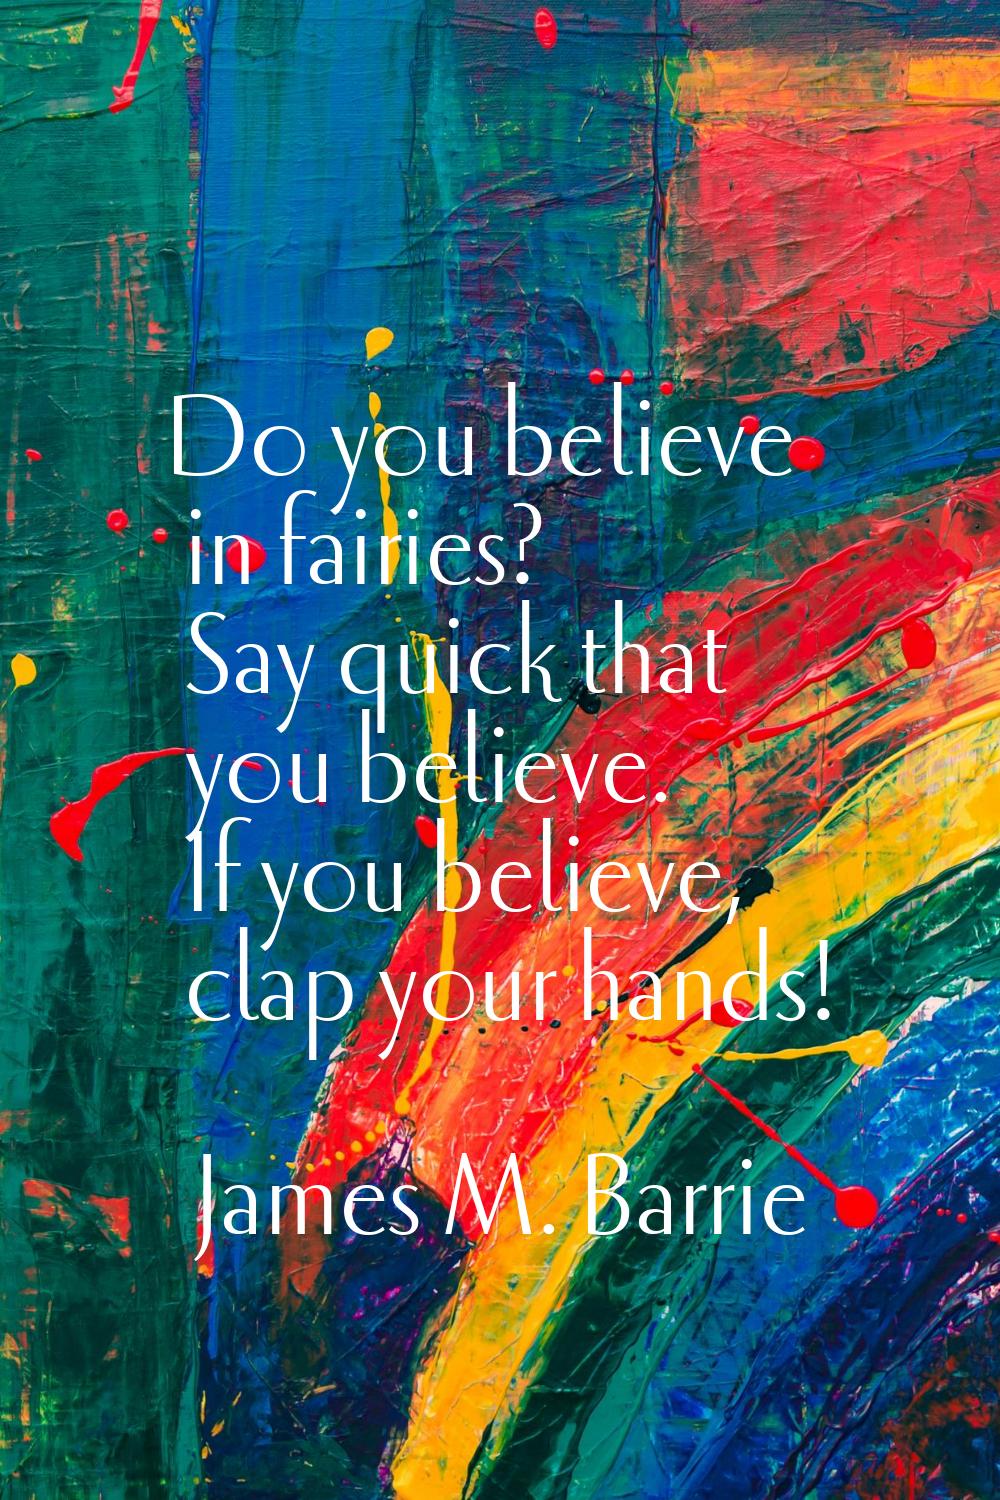 Do you believe in fairies? Say quick that you believe. If you believe, clap your hands!